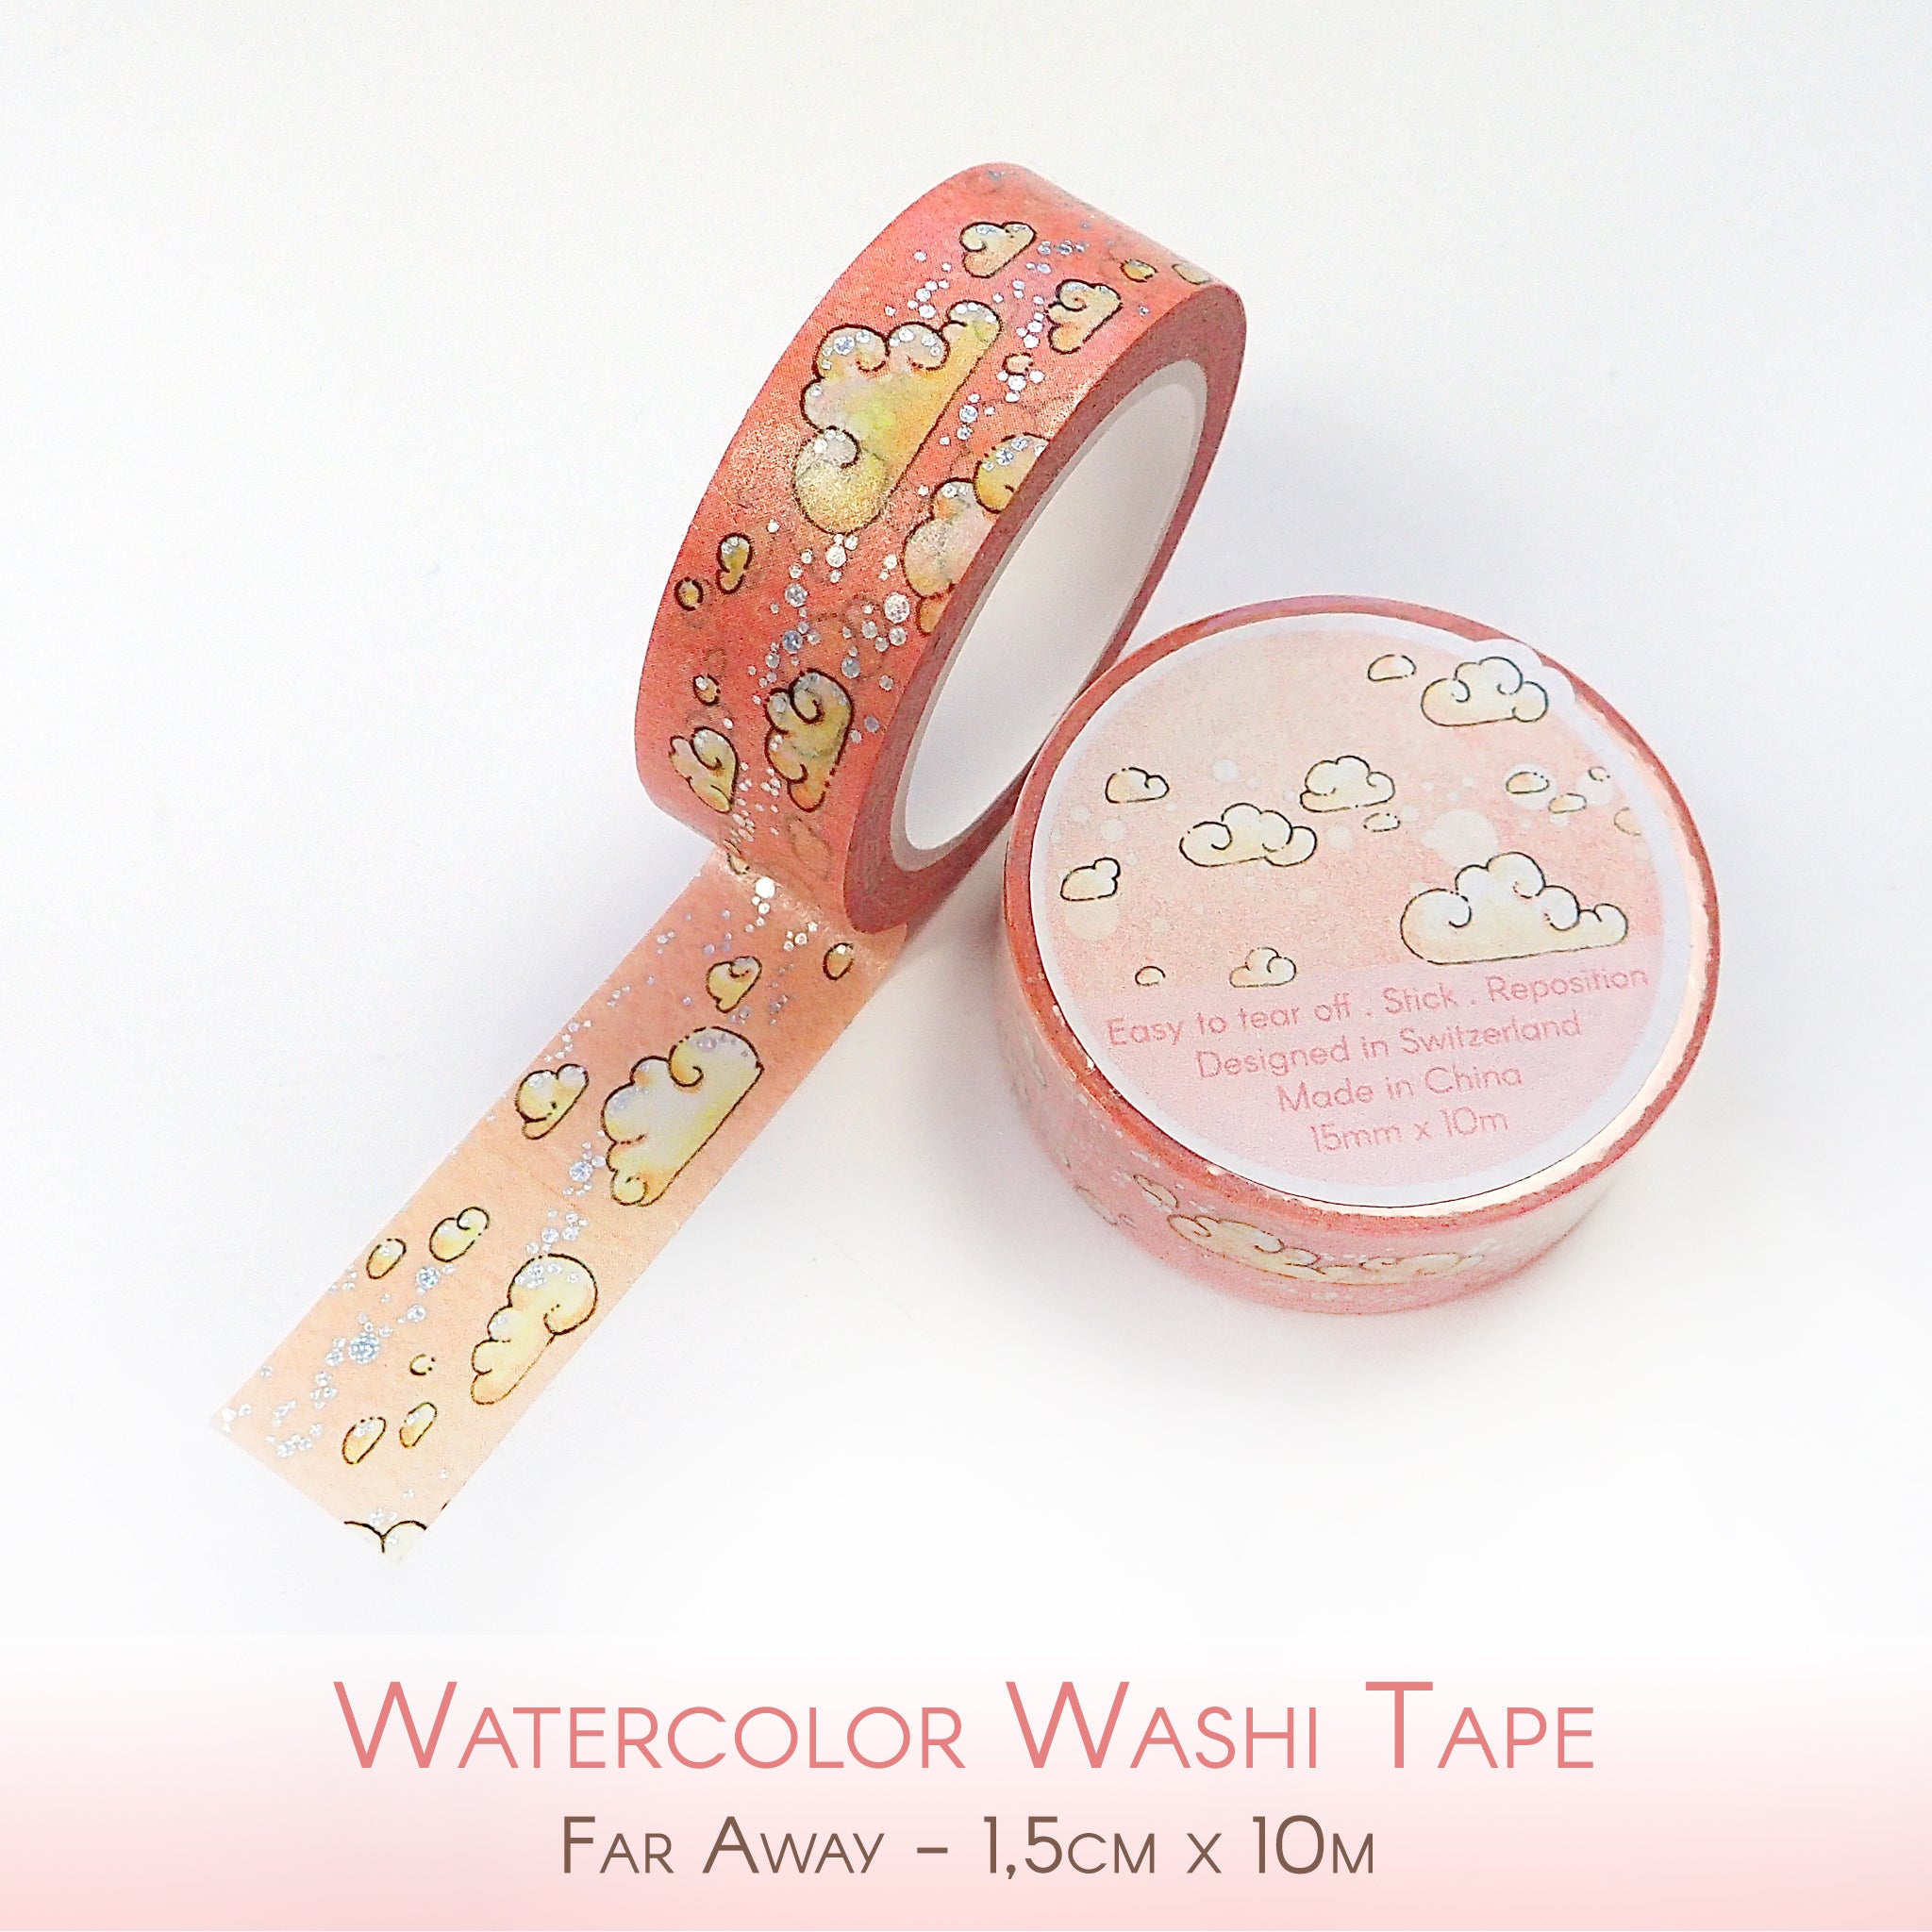 Watercolor foiled washi tape with clouds in pink tones